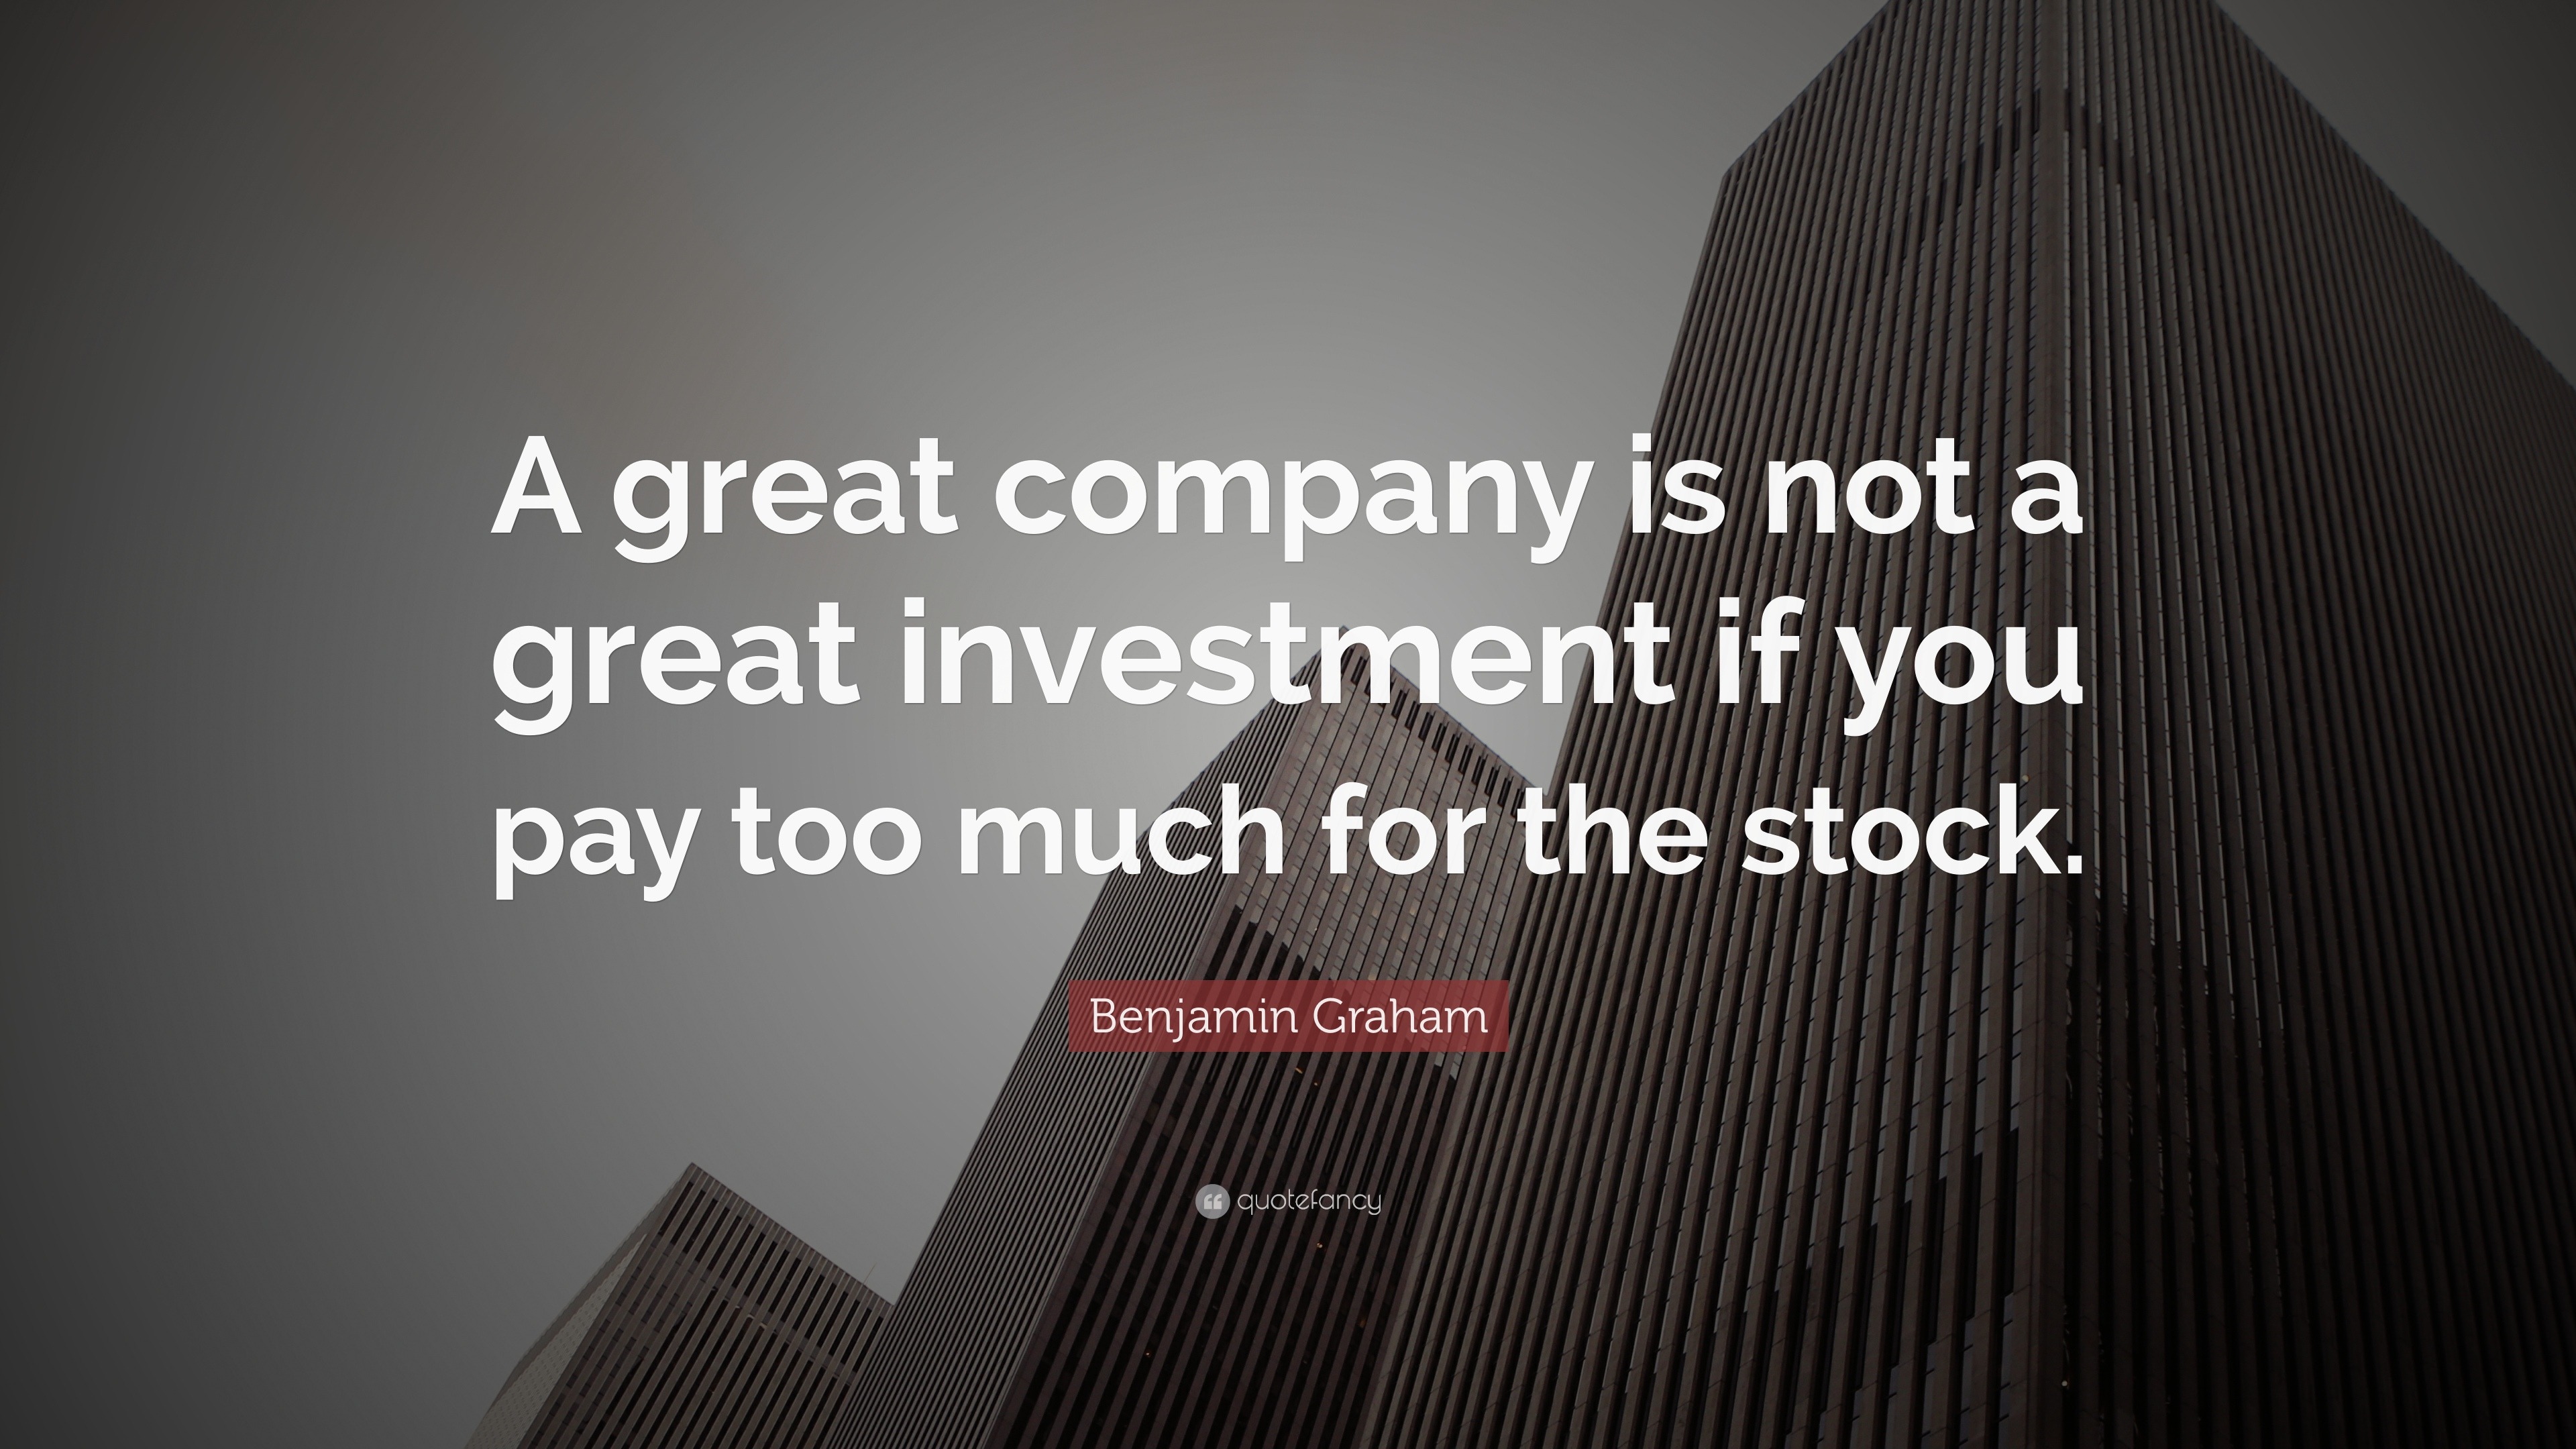 Benjamin Graham Quote: “A great company is not a great investment if